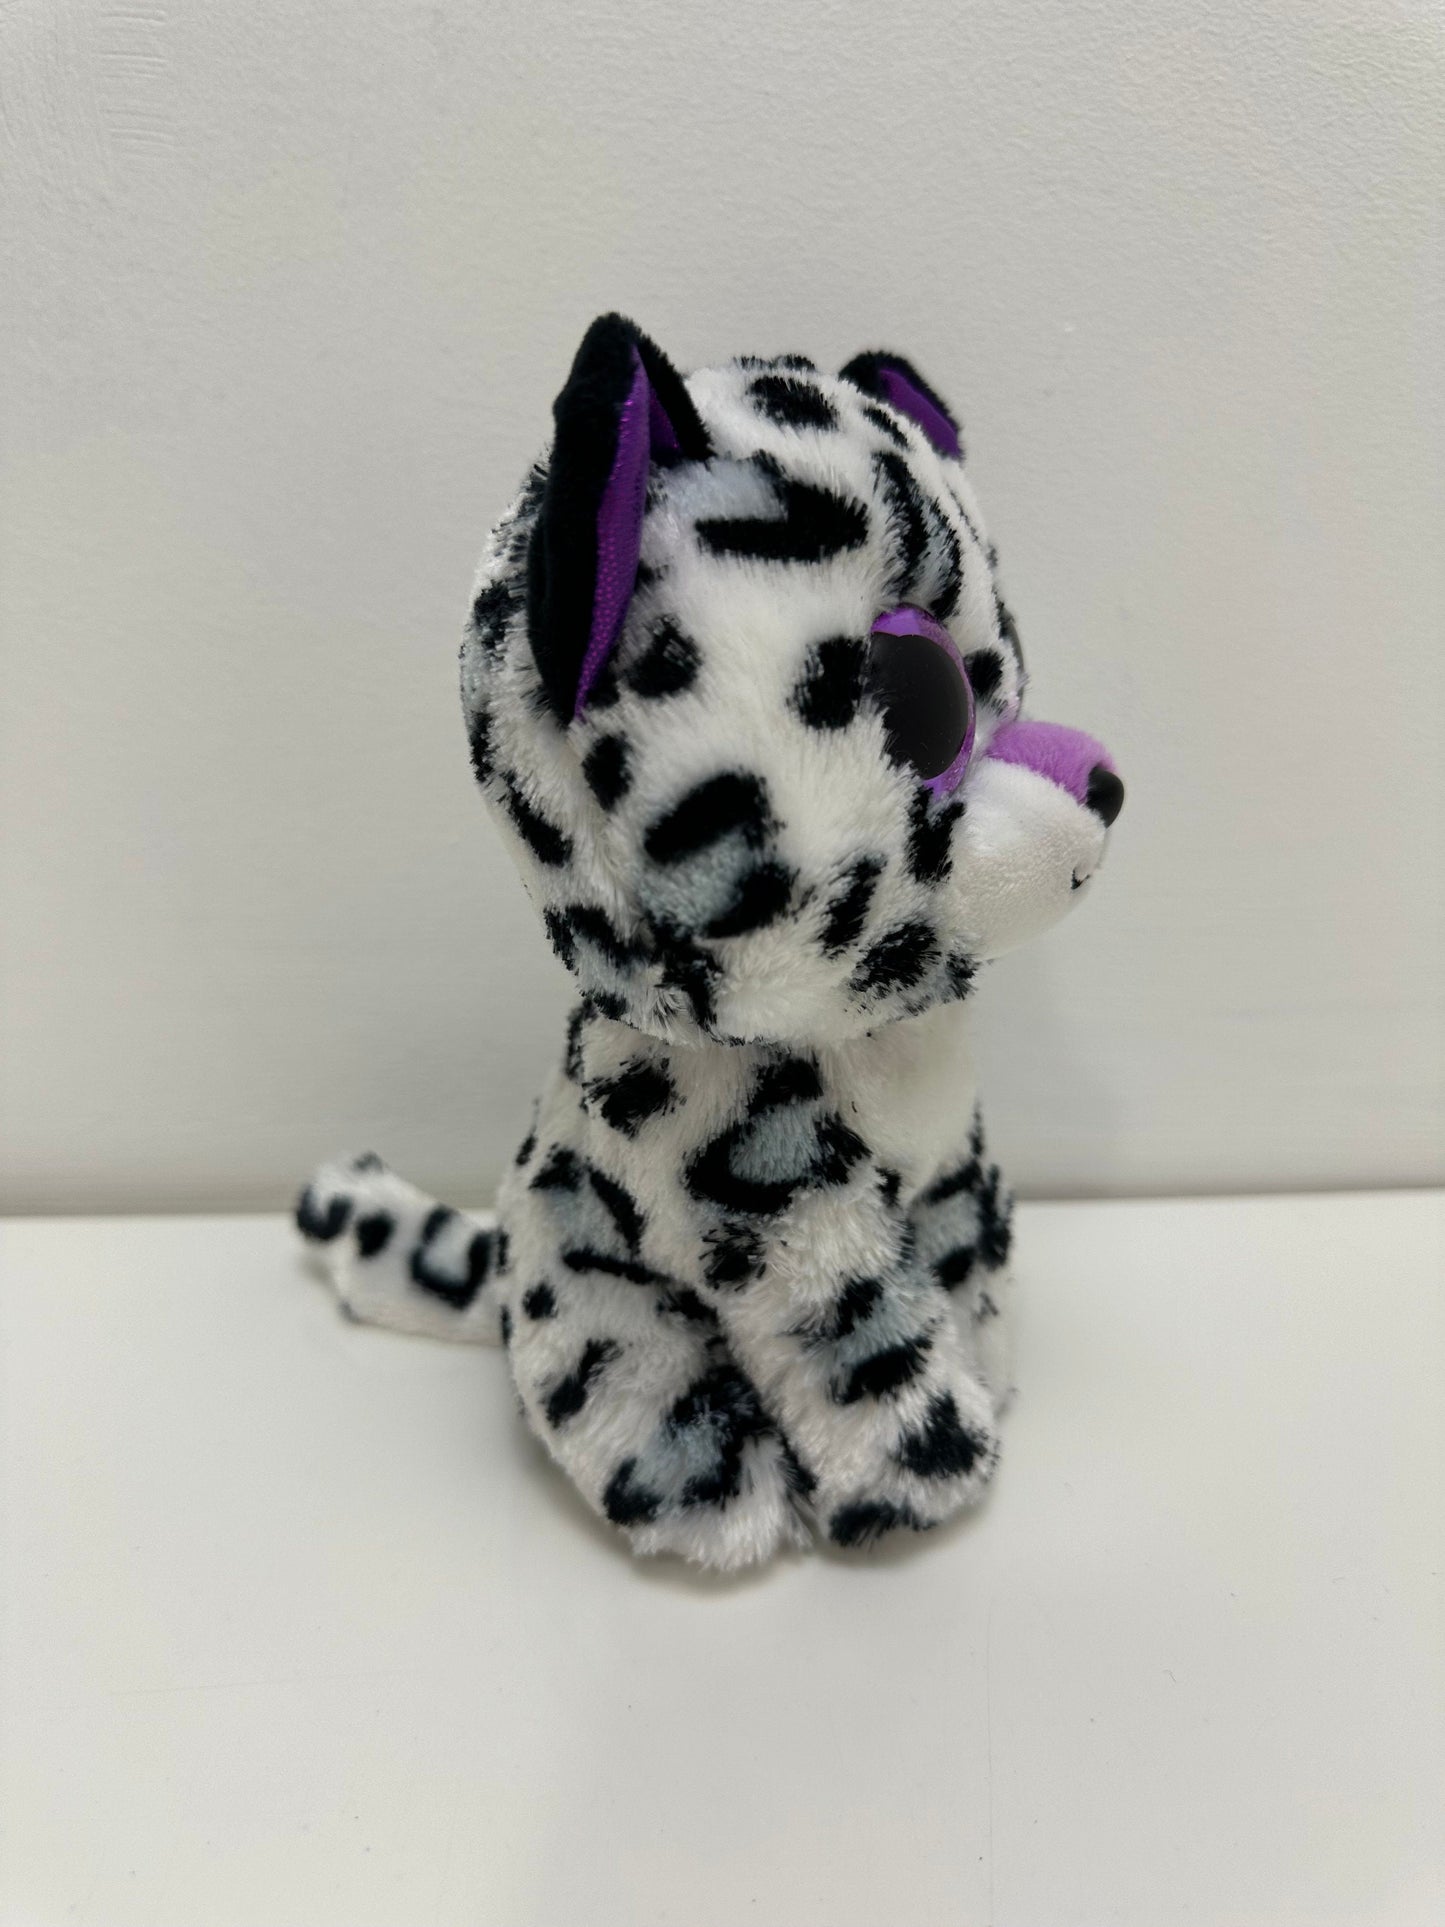 Ty Beanie Boo “Violet” the Purple Leopard - Claire’s Exclusive - No Hang Tag (6 inch)